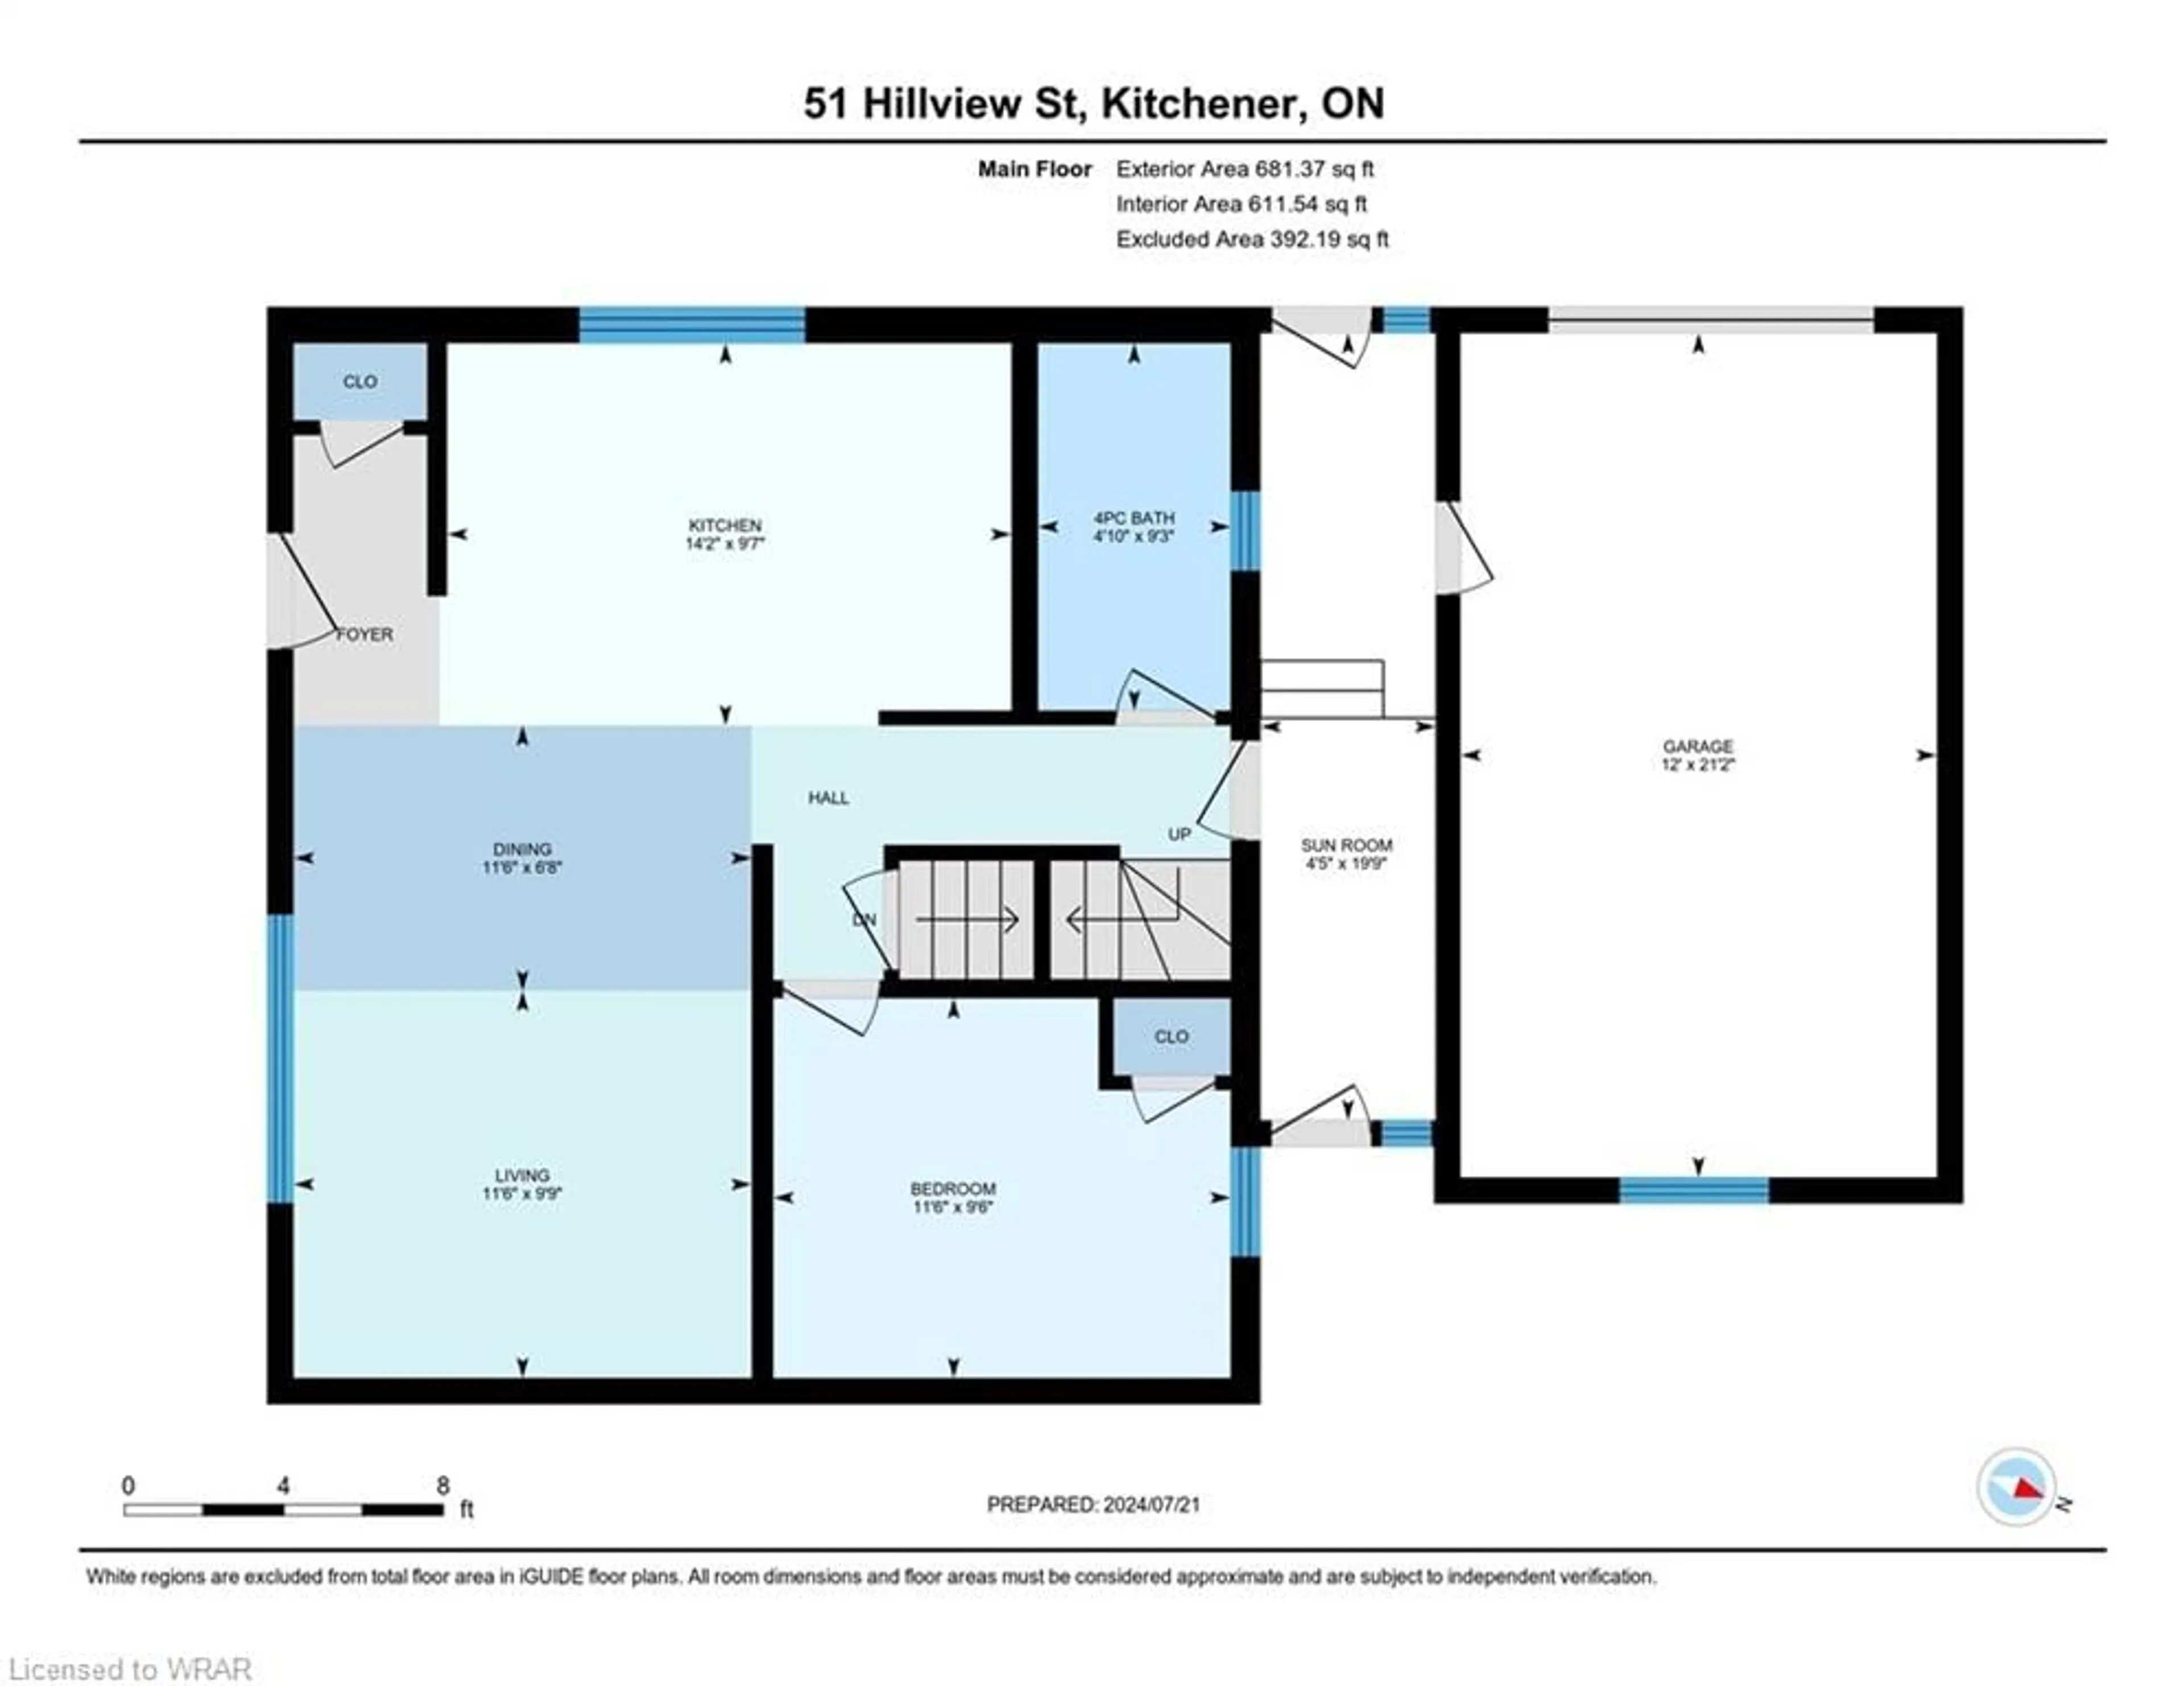 Floor plan for 51 Hillview St, Kitchener Ontario N2H 5P9